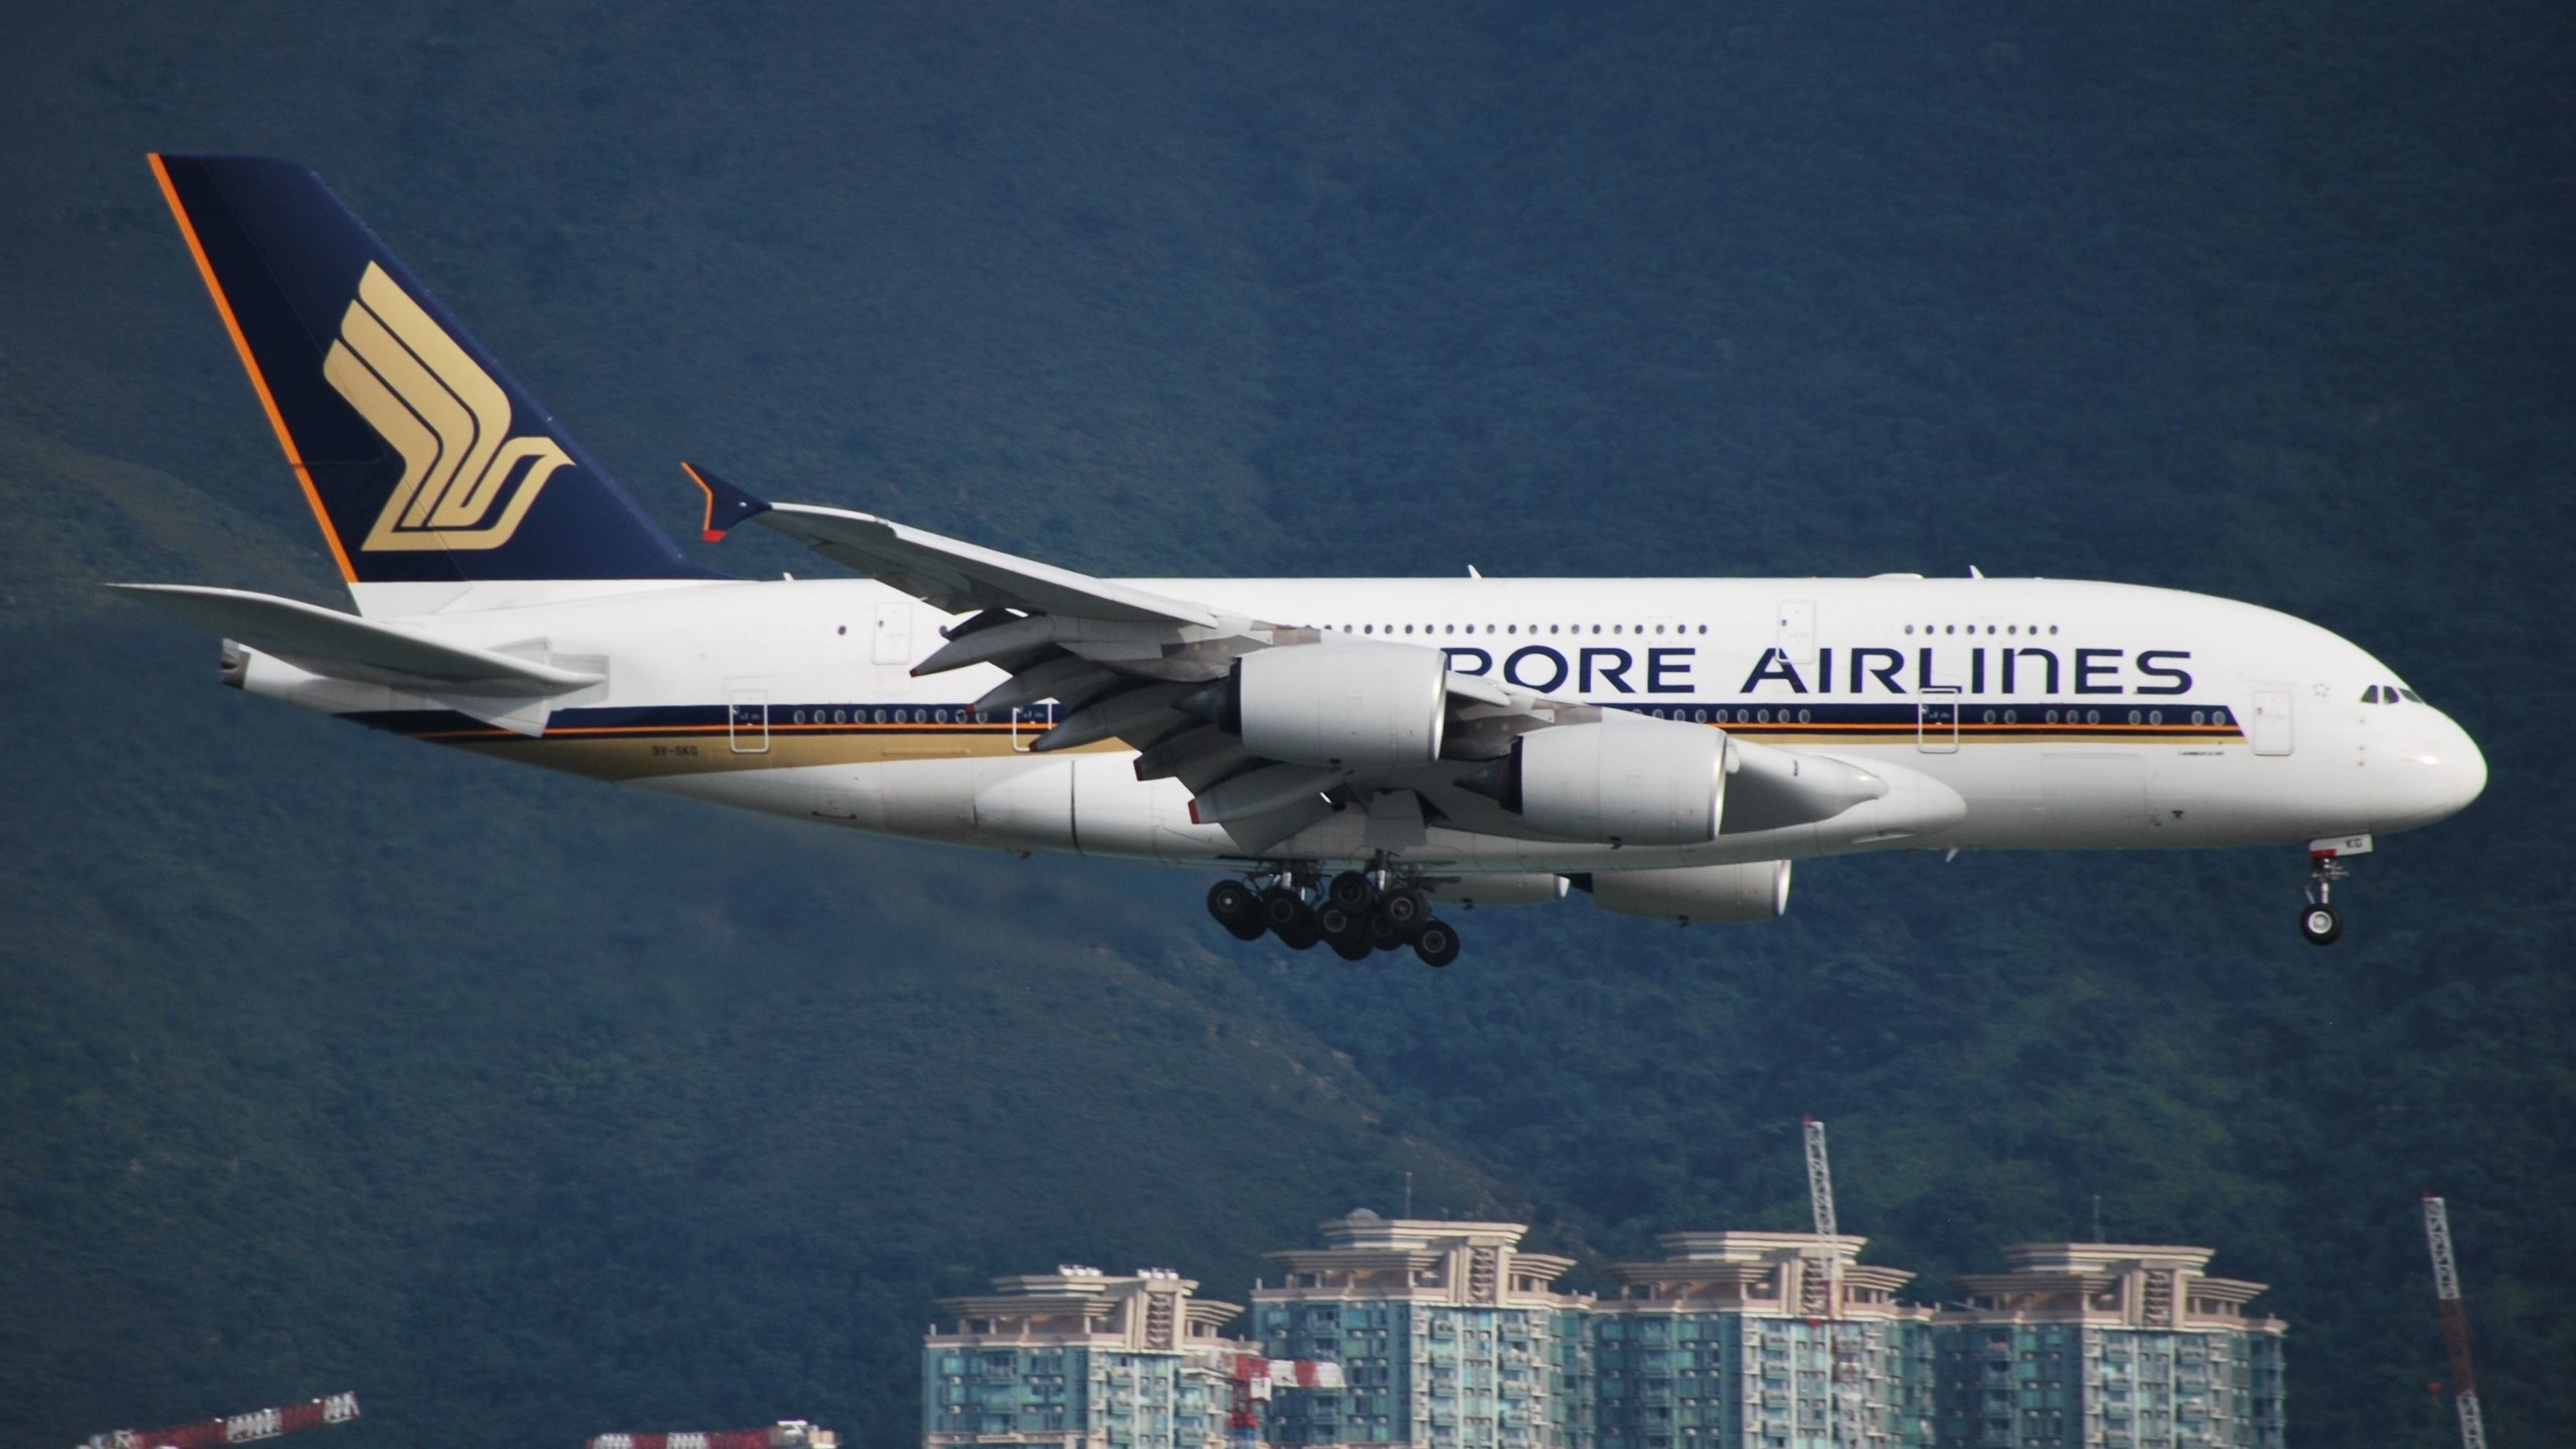 A Singapore Airlines Airbus A380 landing